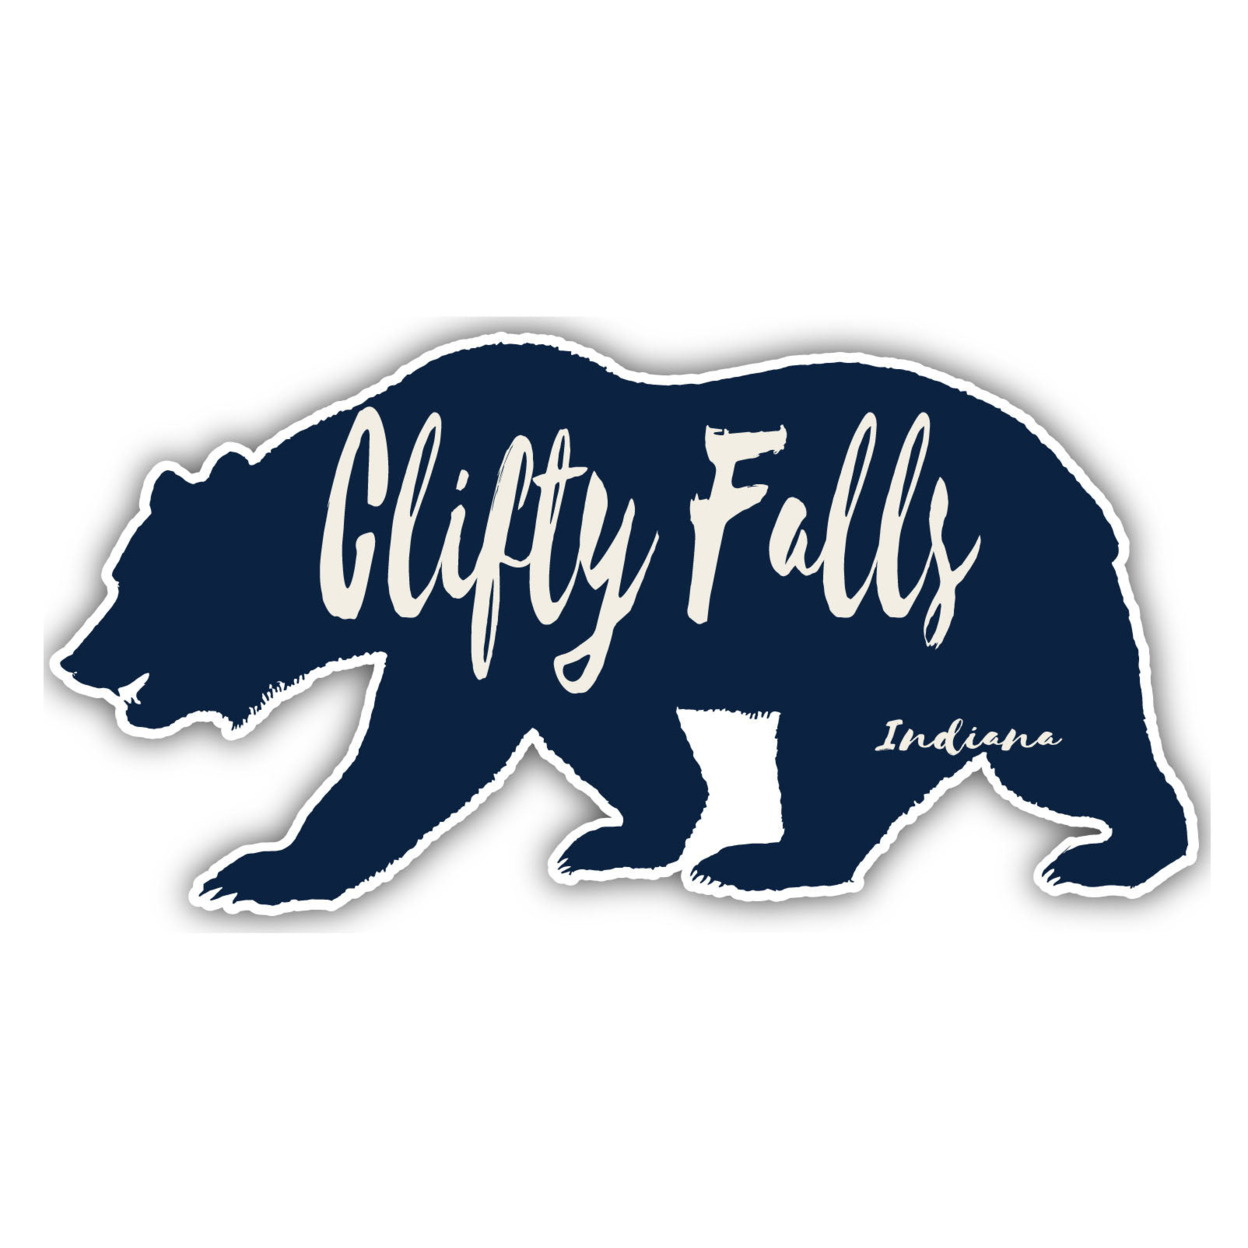 Clifty Falls Indiana Souvenir Decorative Stickers (Choose Theme And Size) - 4-Pack, 10-Inch, Bear